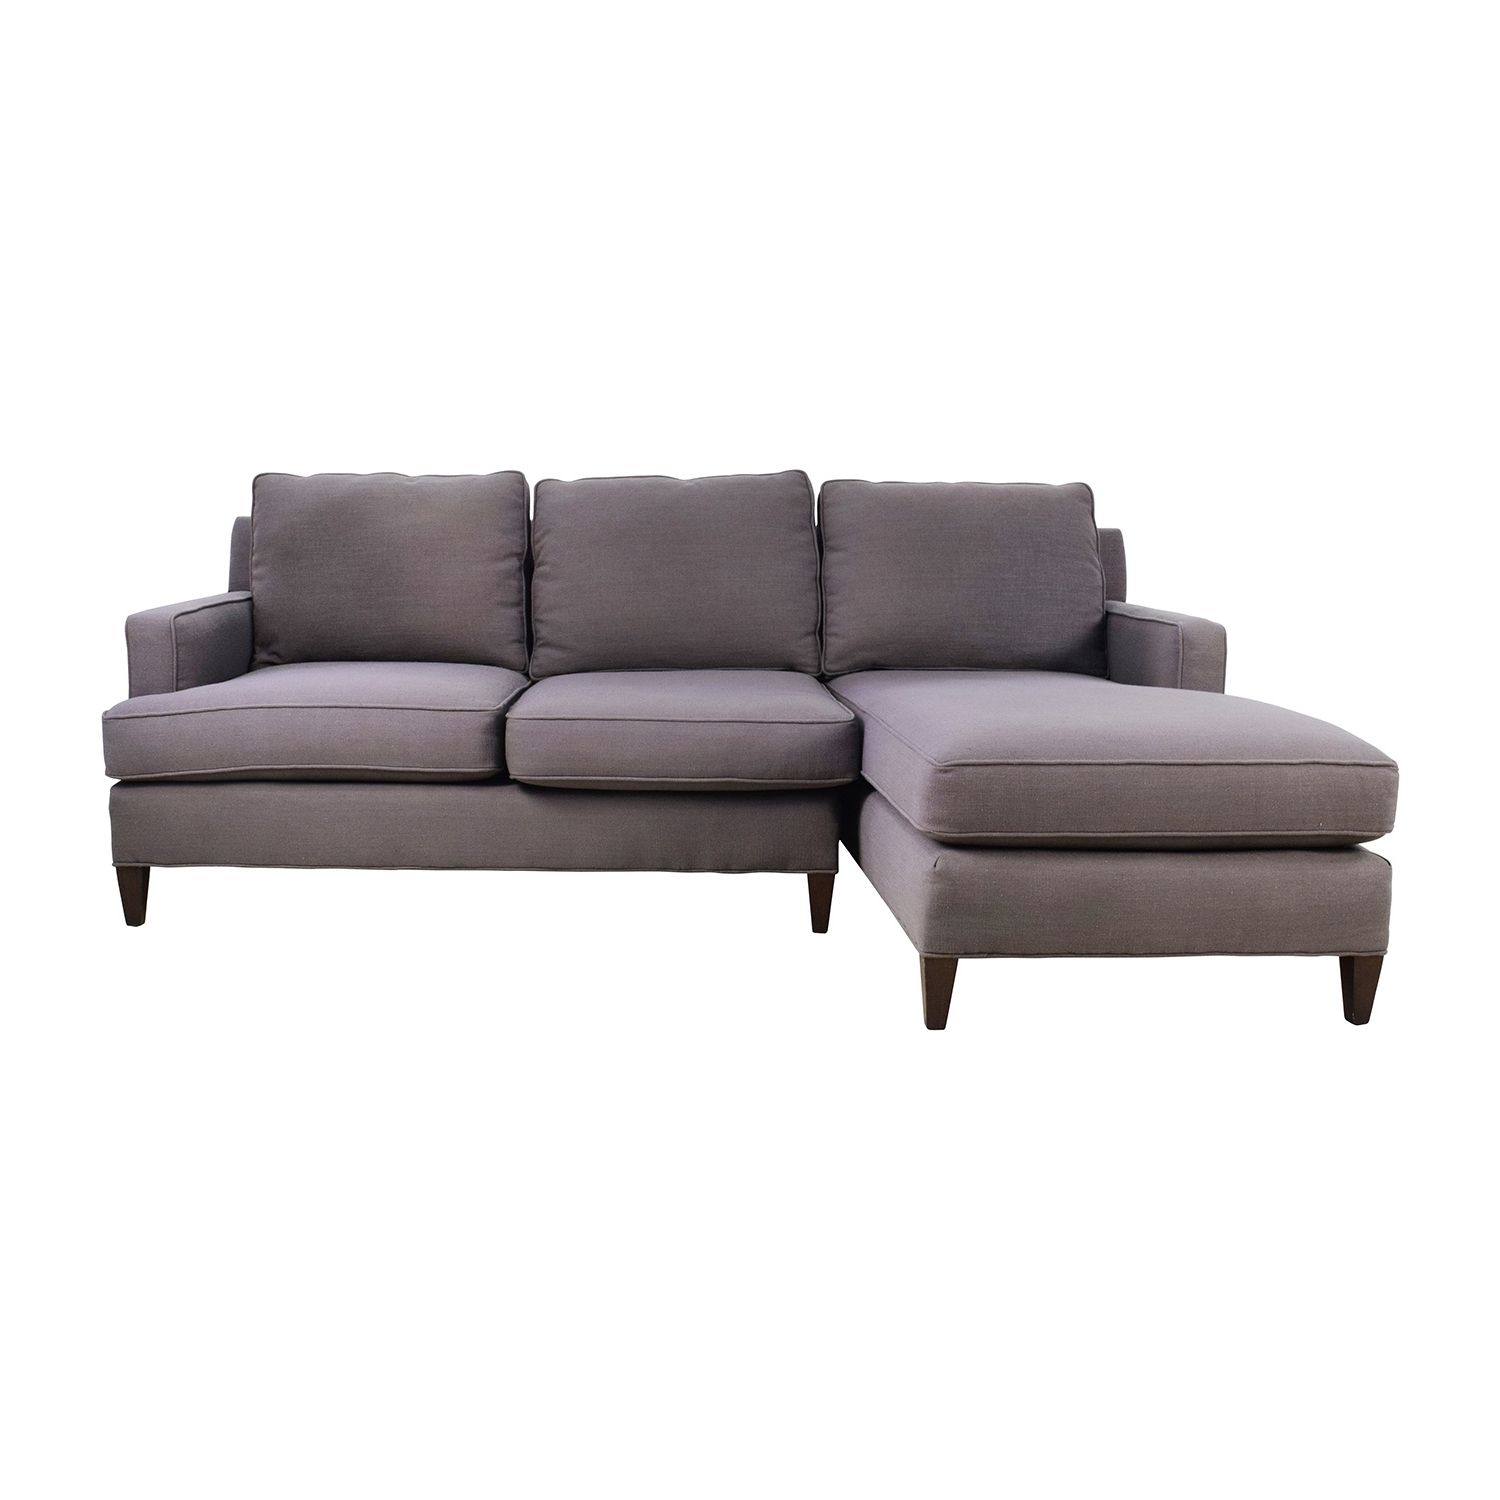 [%81% Off – Mitchell Gold & Bob Williams Mitchell Gold + Bob Regarding Well Known Sectional Sofas At Charlotte Nc|sectional Sofas At Charlotte Nc Pertaining To Latest 81% Off – Mitchell Gold & Bob Williams Mitchell Gold + Bob|best And Newest Sectional Sofas At Charlotte Nc Inside 81% Off – Mitchell Gold & Bob Williams Mitchell Gold + Bob|newest 81% Off – Mitchell Gold & Bob Williams Mitchell Gold + Bob Pertaining To Sectional Sofas At Charlotte Nc%] (View 15 of 15)